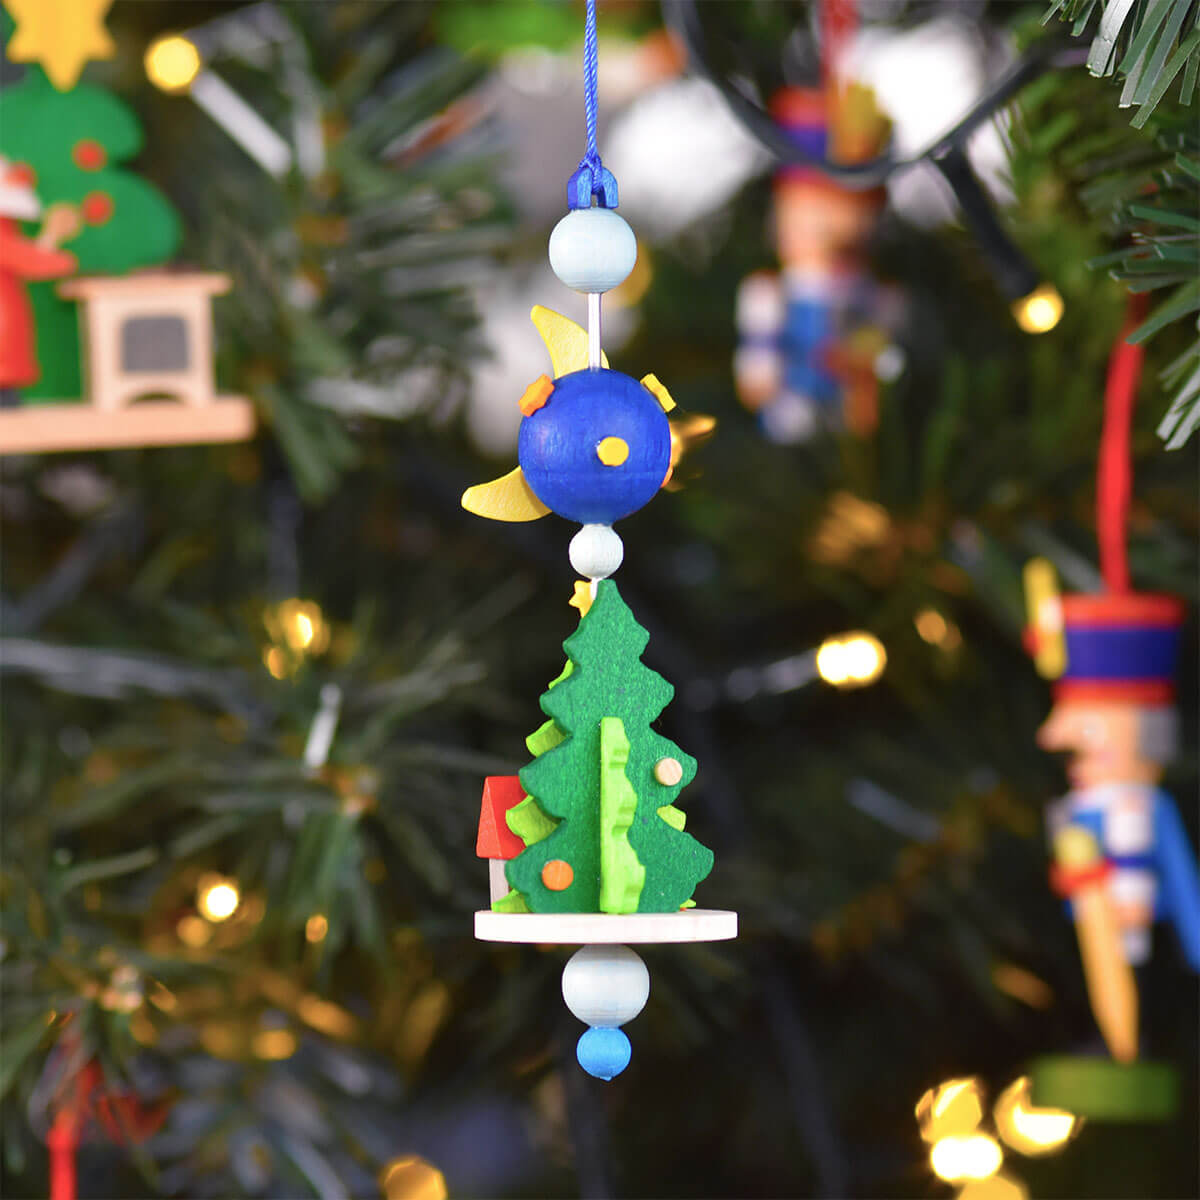 Spindle Ornament with nutcracker